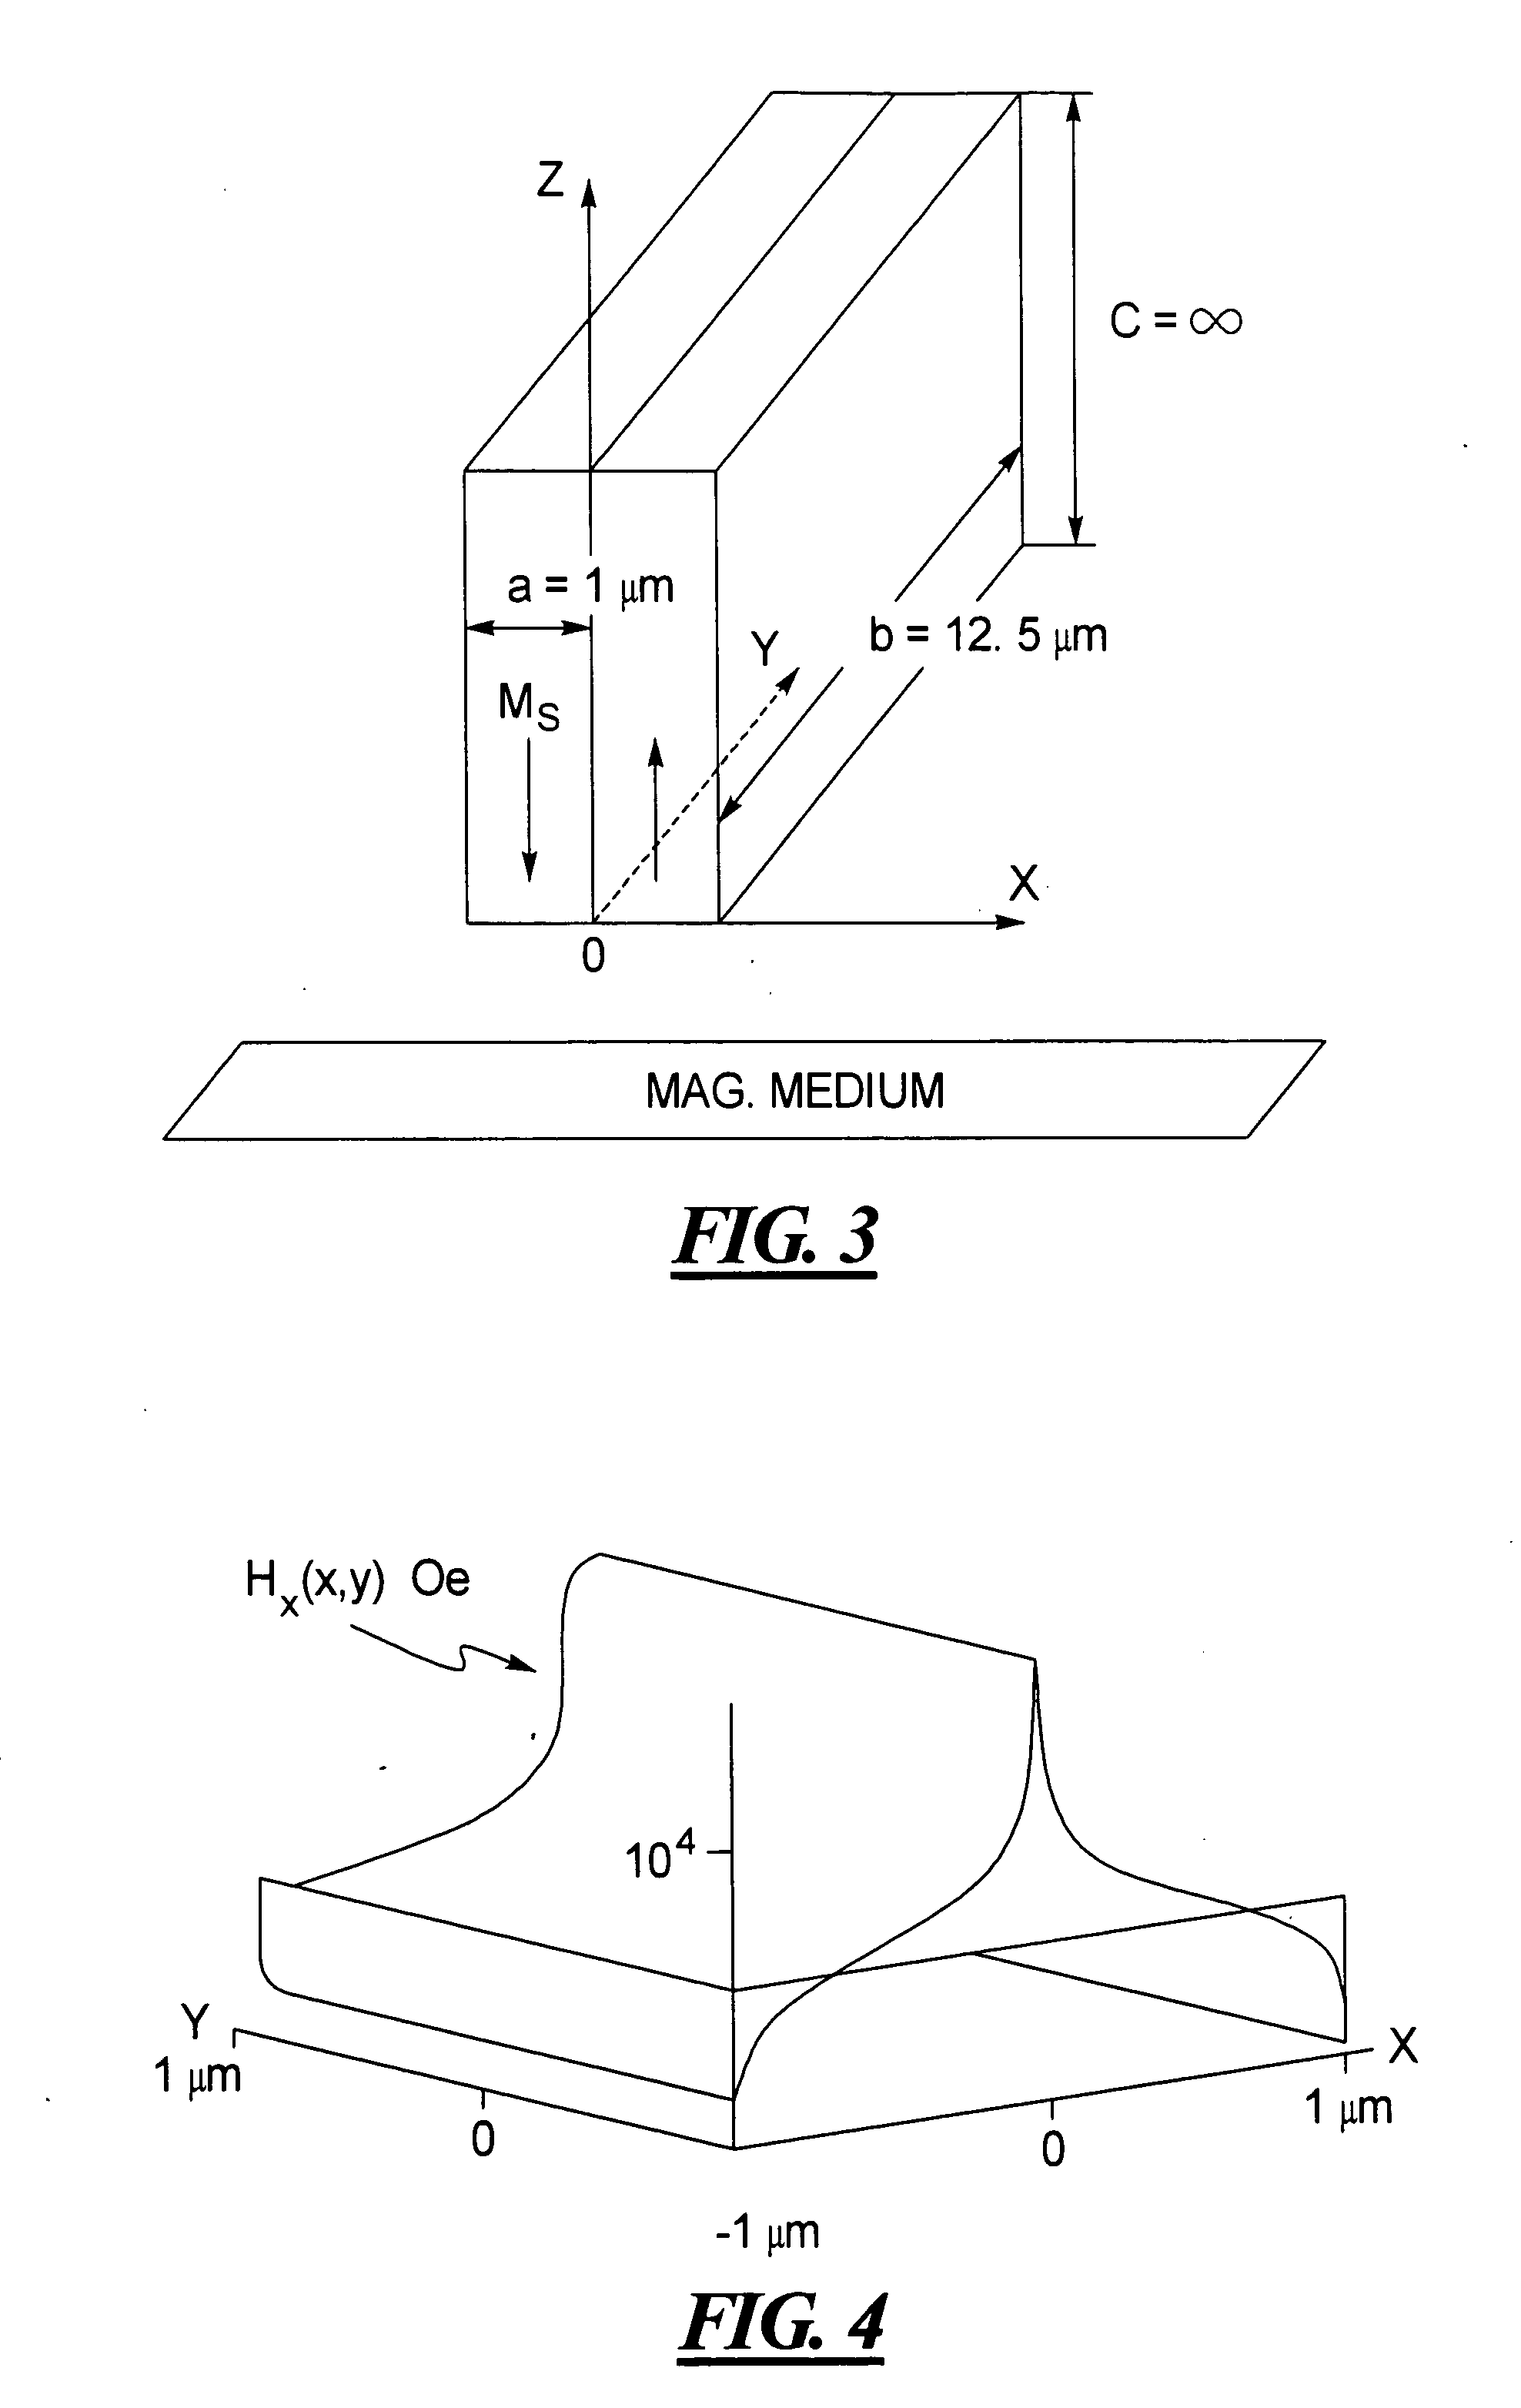 Magnetic recording head and method for high coercivity media, employing concentrated stray magnetic fields